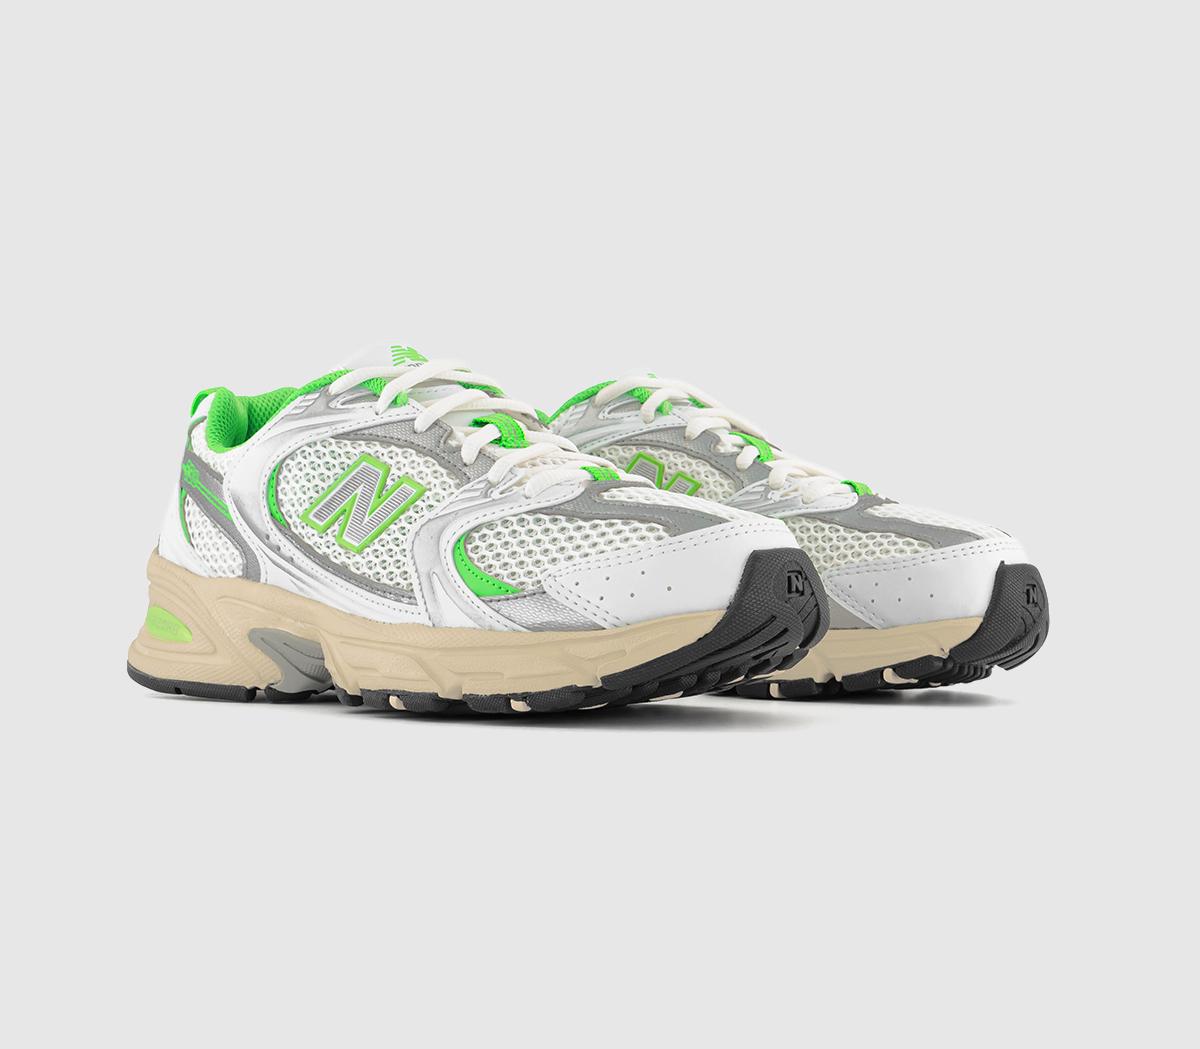 New Balance Womens Mr530 Trainers Off White Green Silver, 6